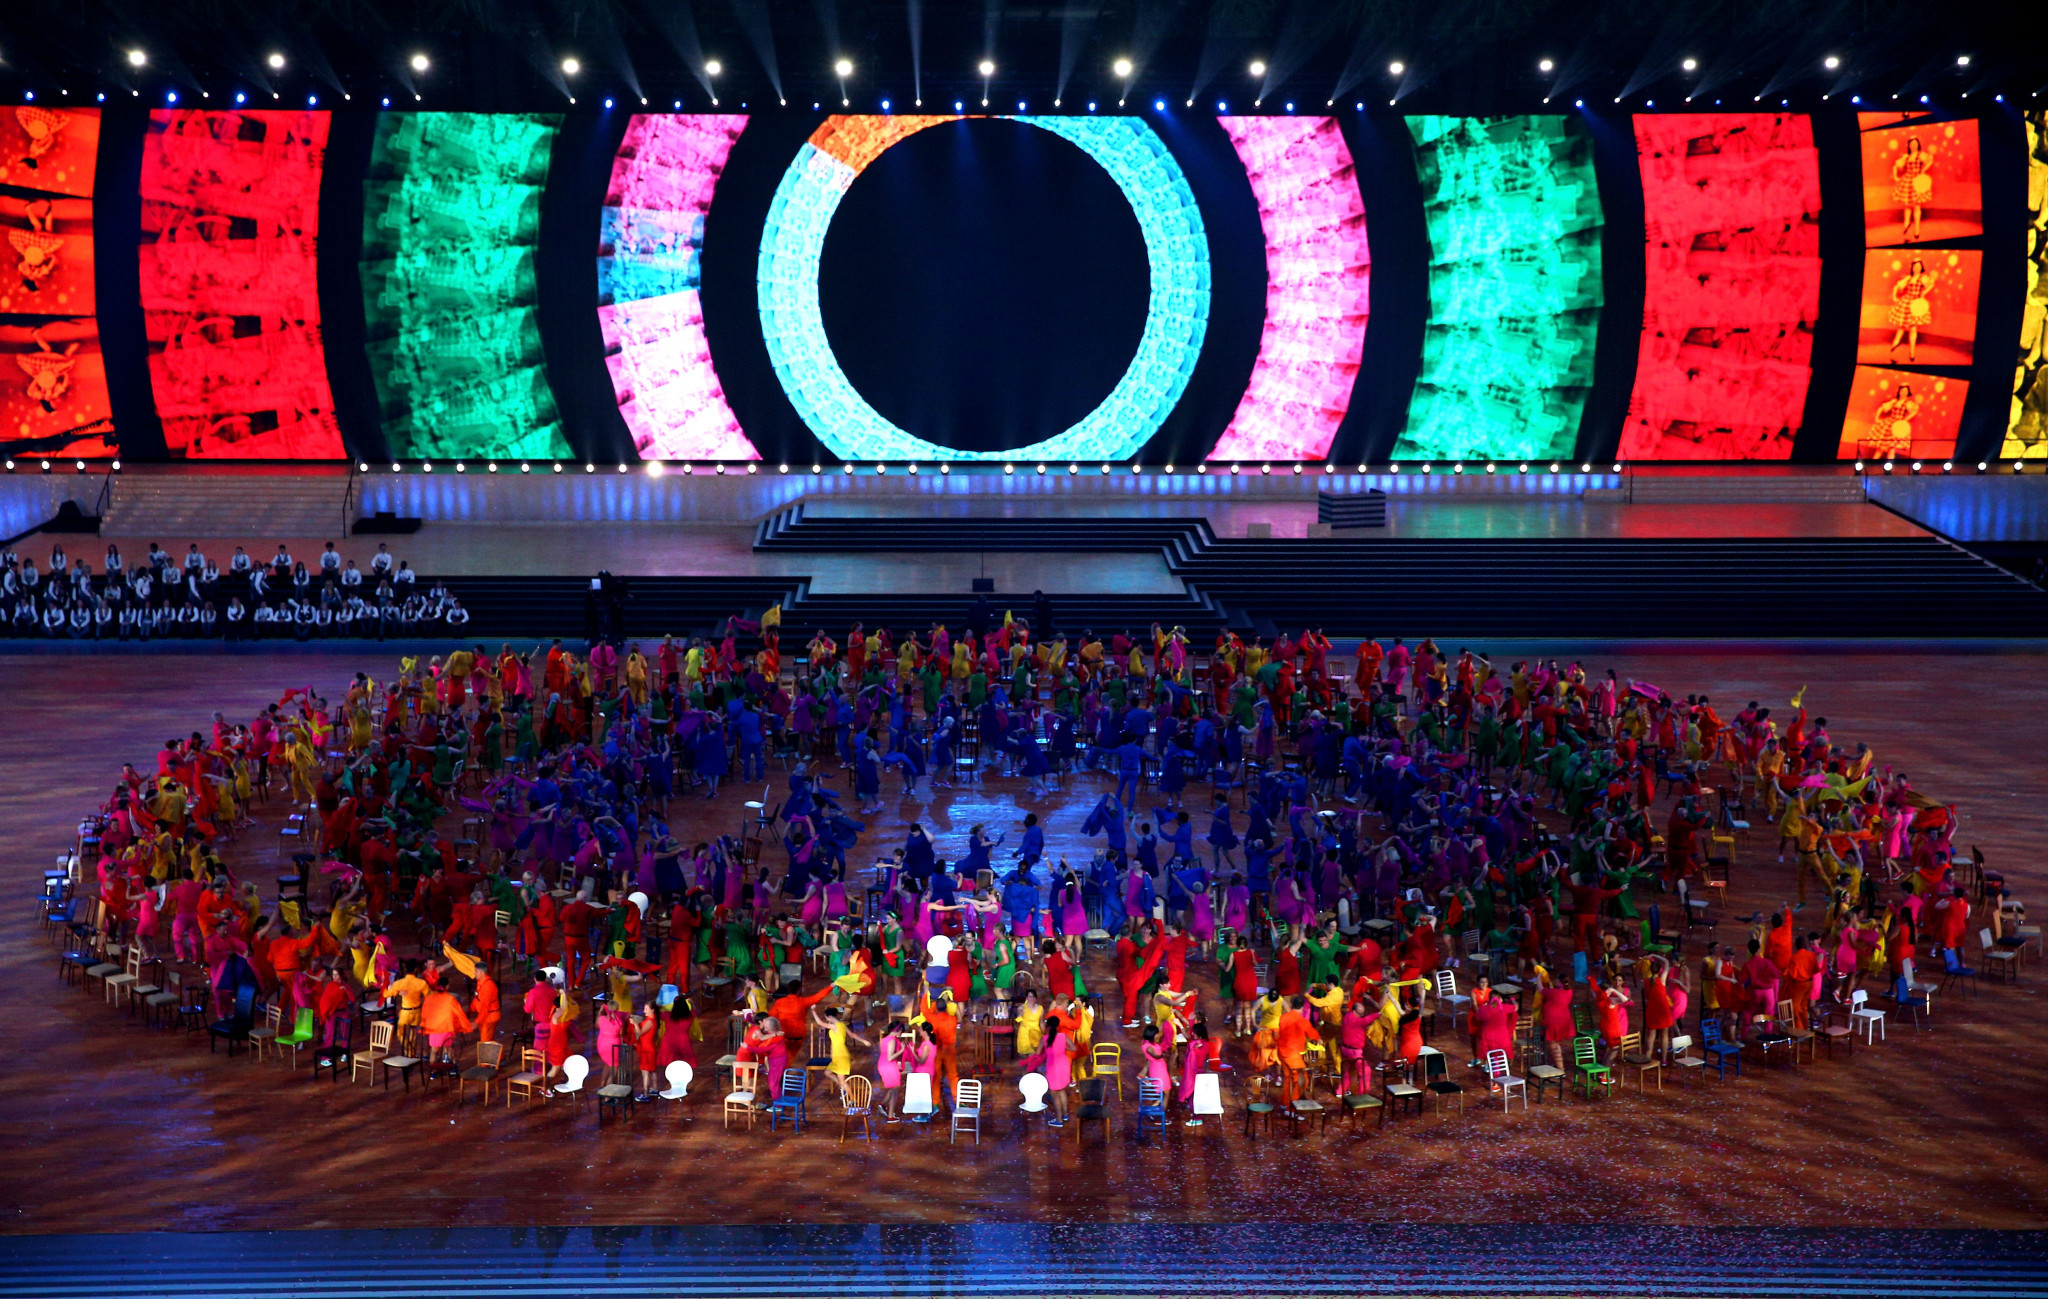 Dancers perform during the Opening Ceremony for the Glasgow 2014 Commonwealth Games at Celtic Park on July 23, 2014 in Glasgow, Scotland ©Getty Images